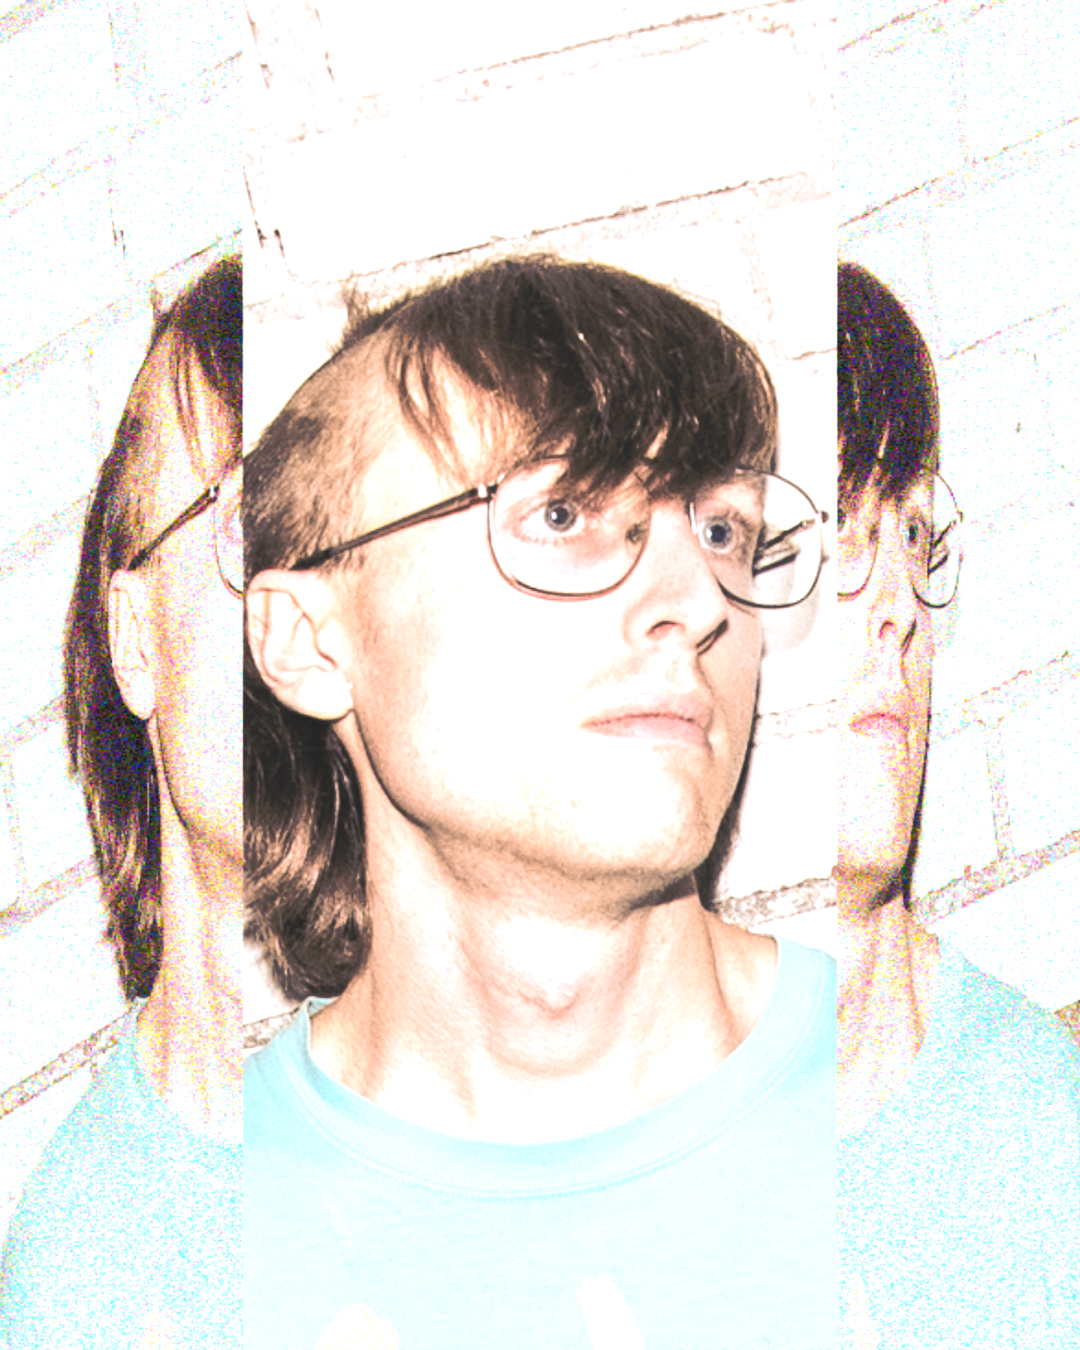 Yheti press shot. Man with big glasses and bangs looking off into the distance.